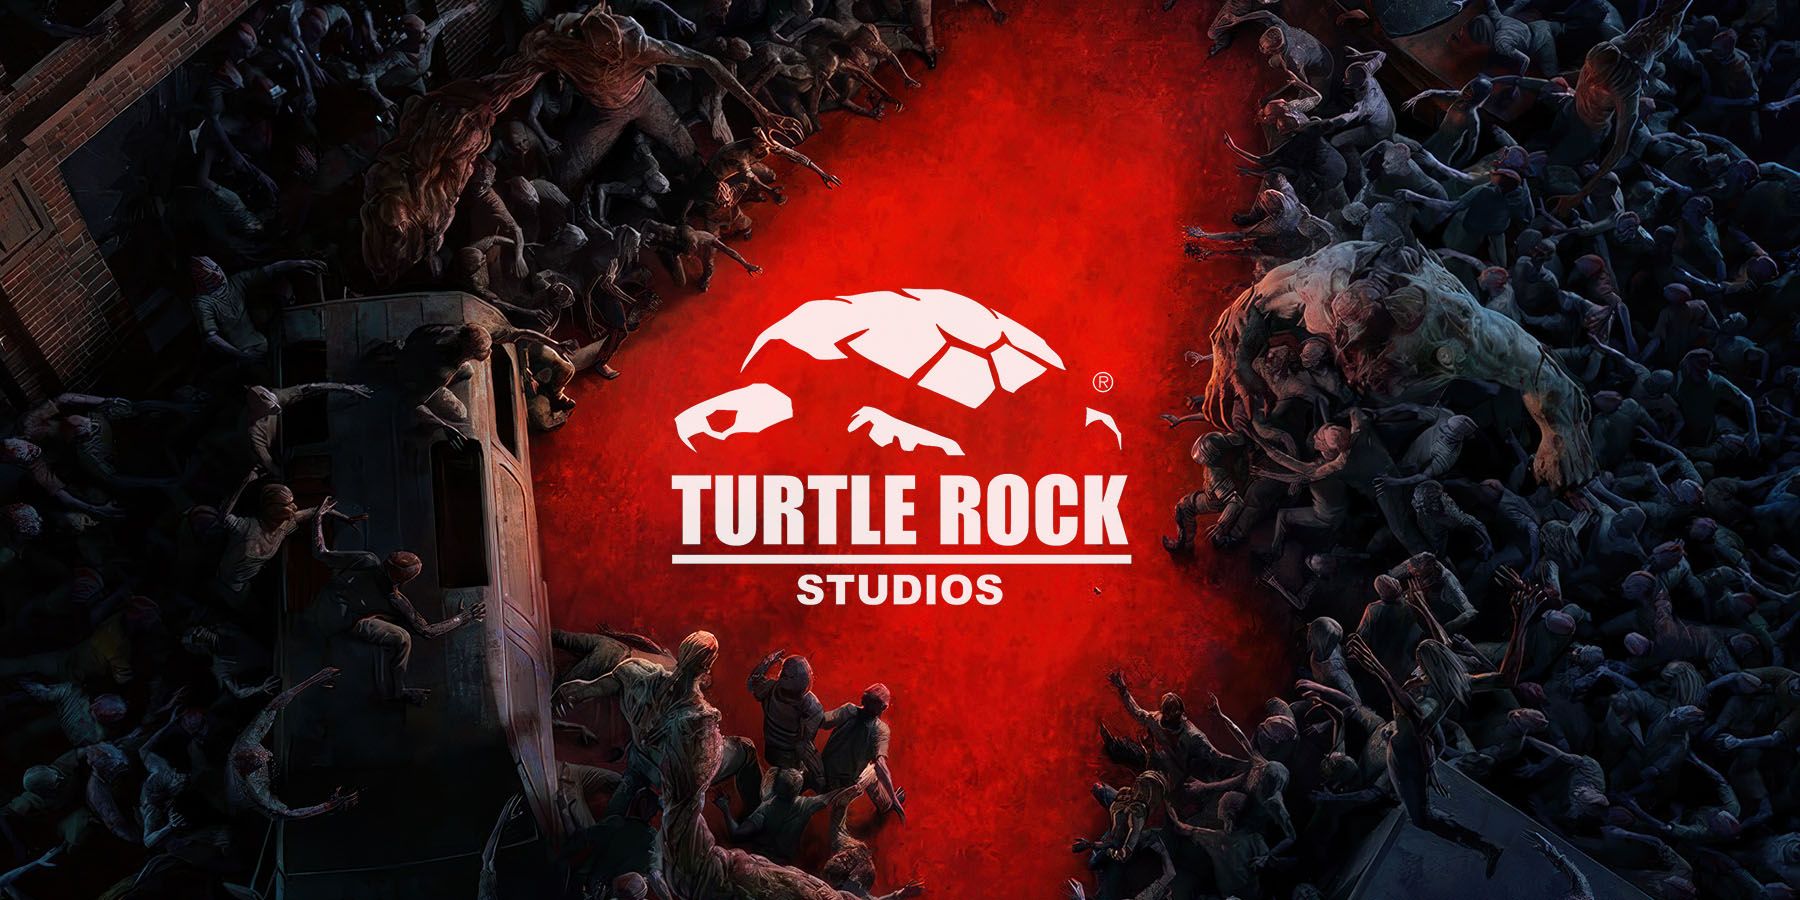 back-4-blood-ends-development-turtle-rock-working-on-new-game-gamerant